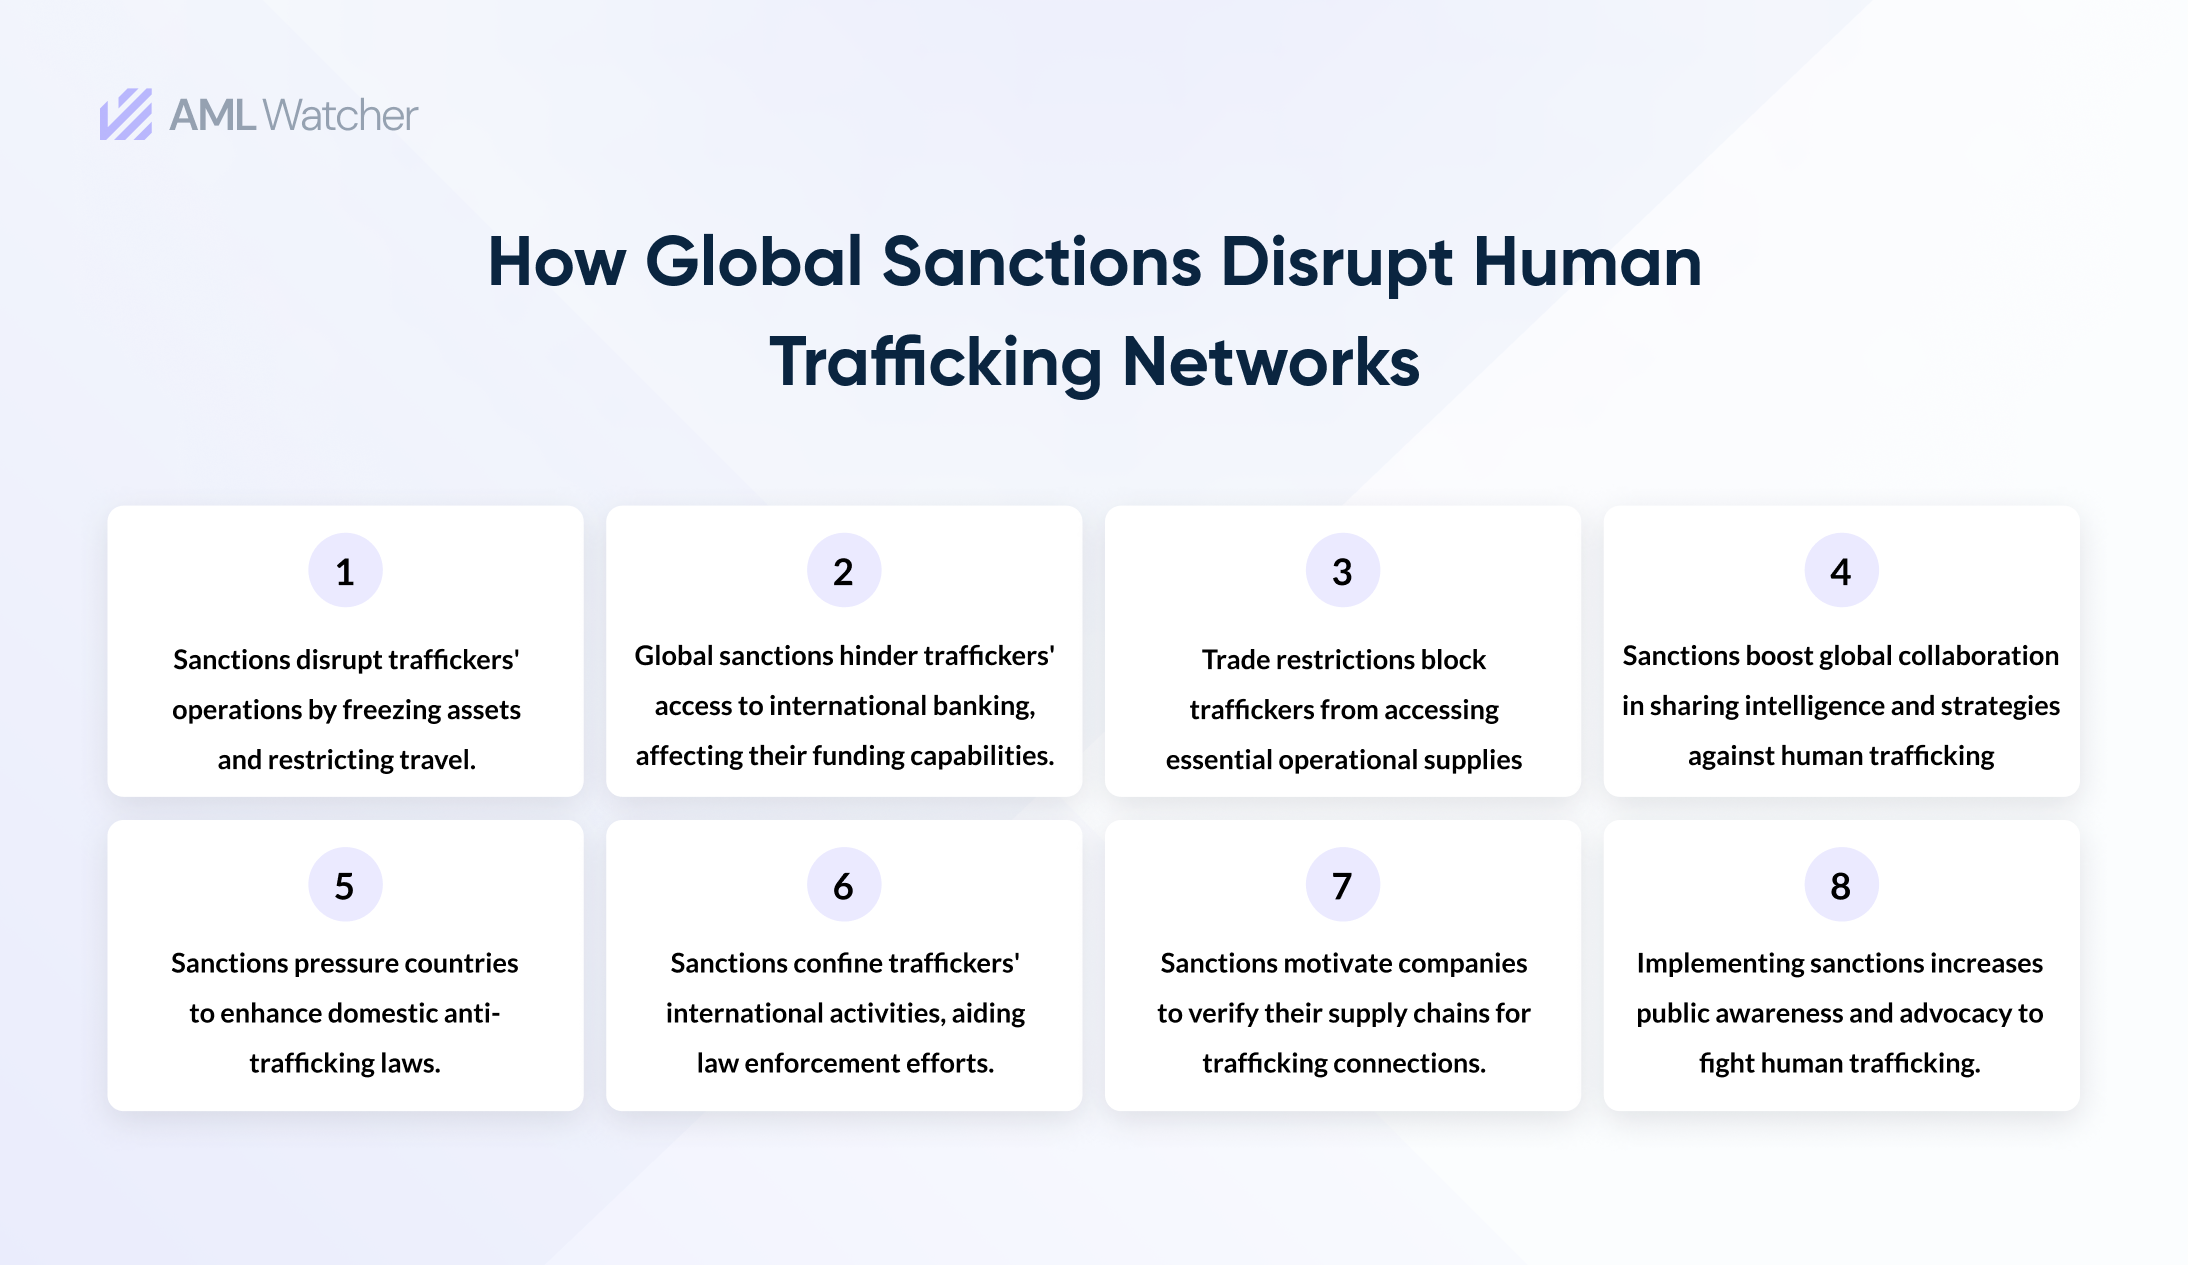 This image shows the role of global sanctions in combating human trafficking networks. 